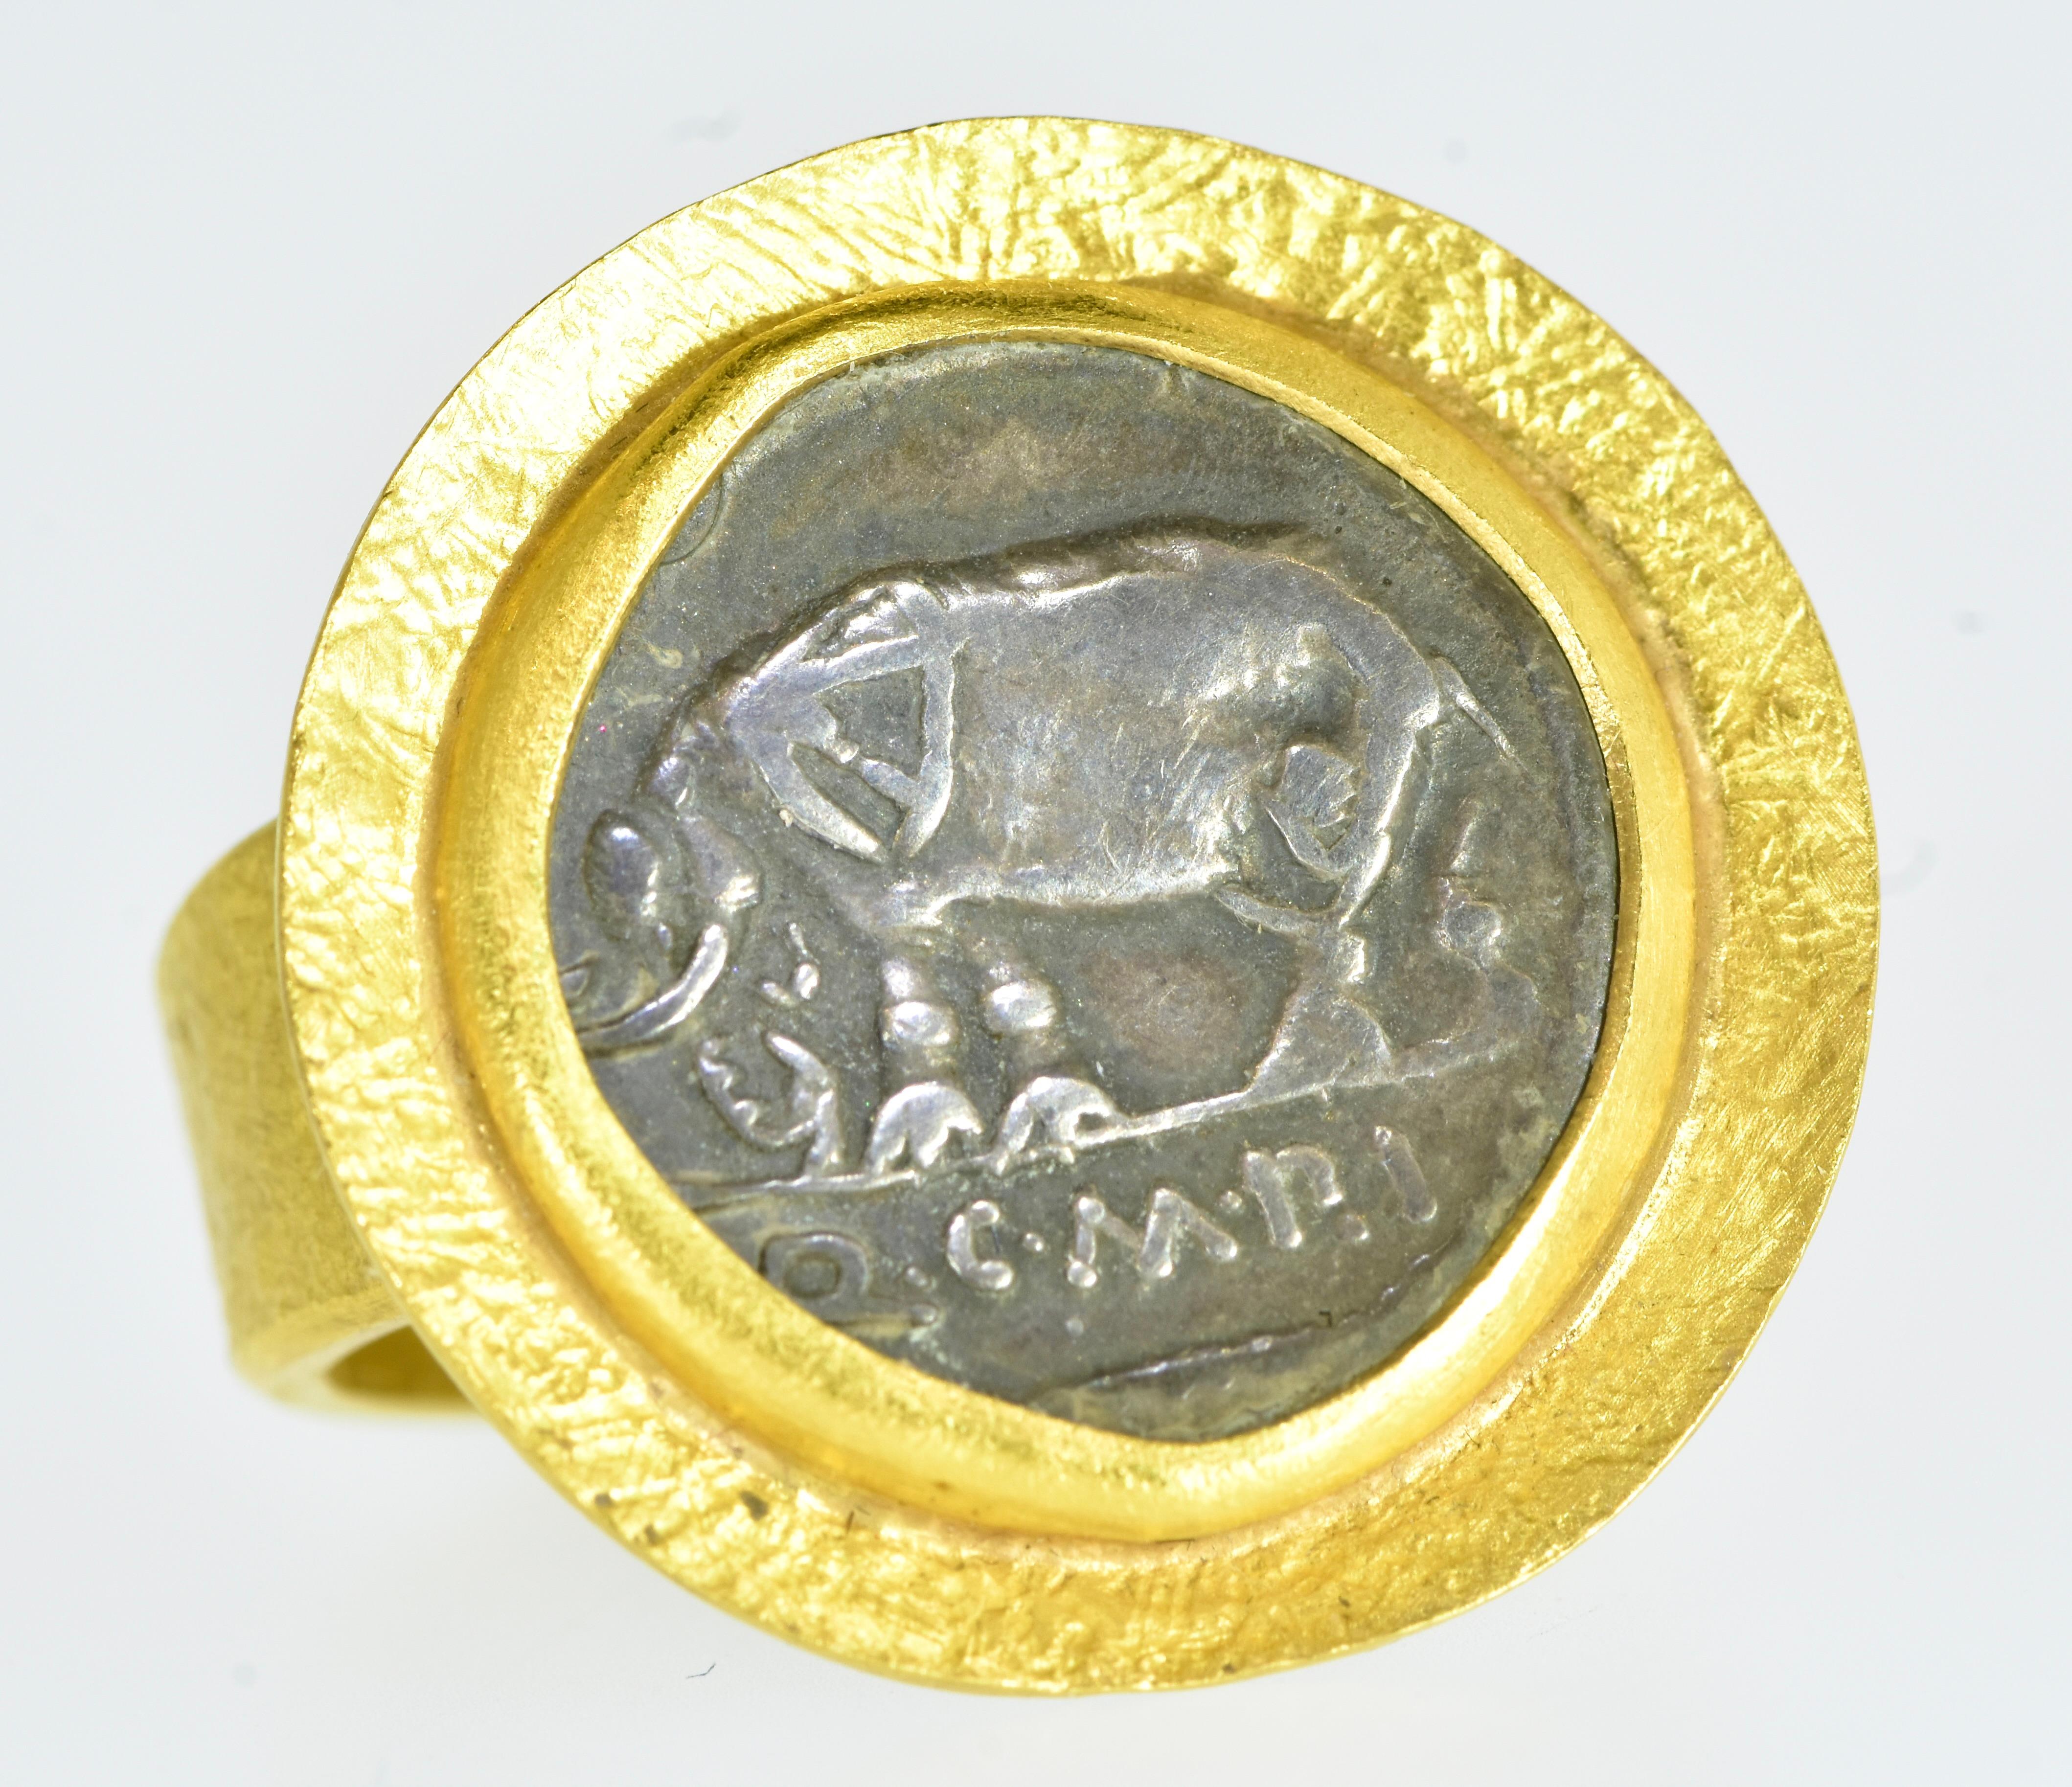 Ancient Denarius, Coin of Quintus Caecilius Metellus Pius, mounted in a 22K hand hammered, hand crafted large and stately gold ring by Fairchild & Co.  The authentic Roman Denarius,  approximately 17 mm., is in fine condition with  fine relief, of 